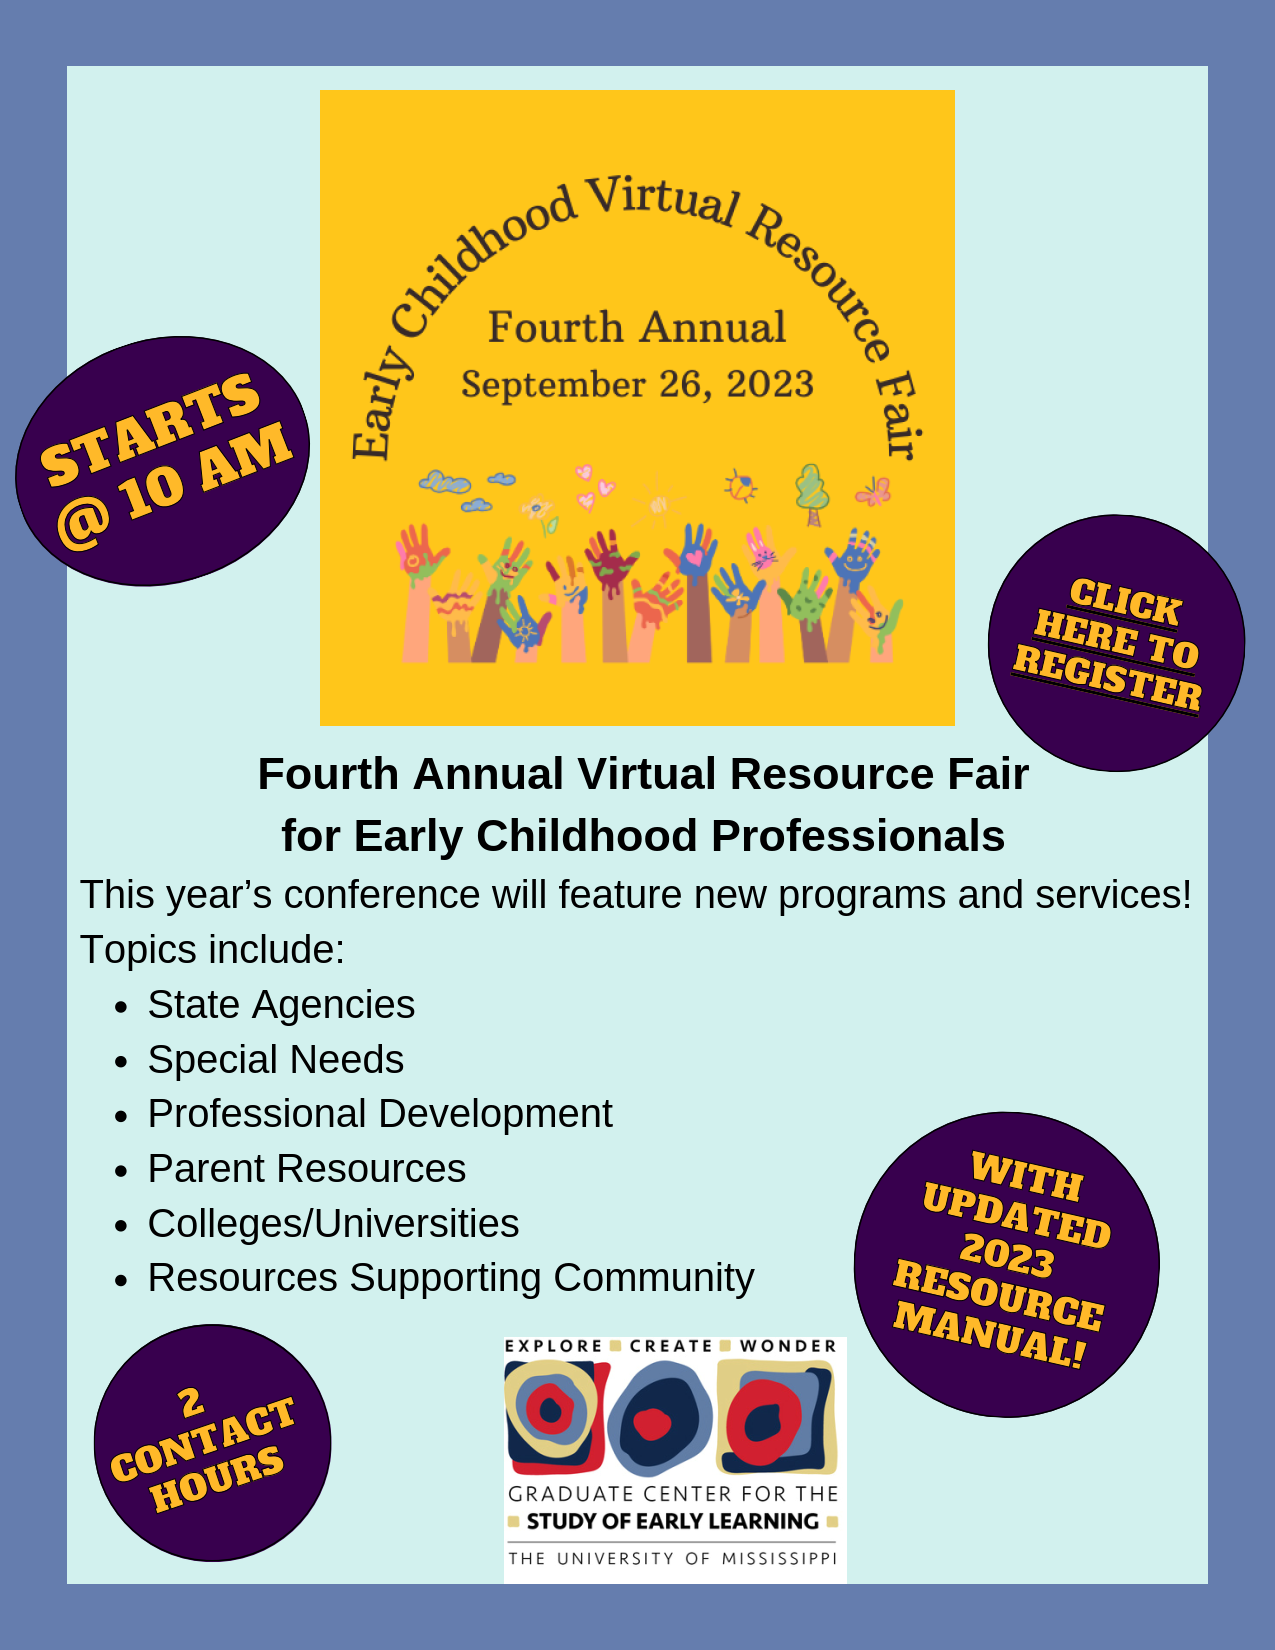 Fourth Annual Virtual Resource Fair for Early Childhood Professionals